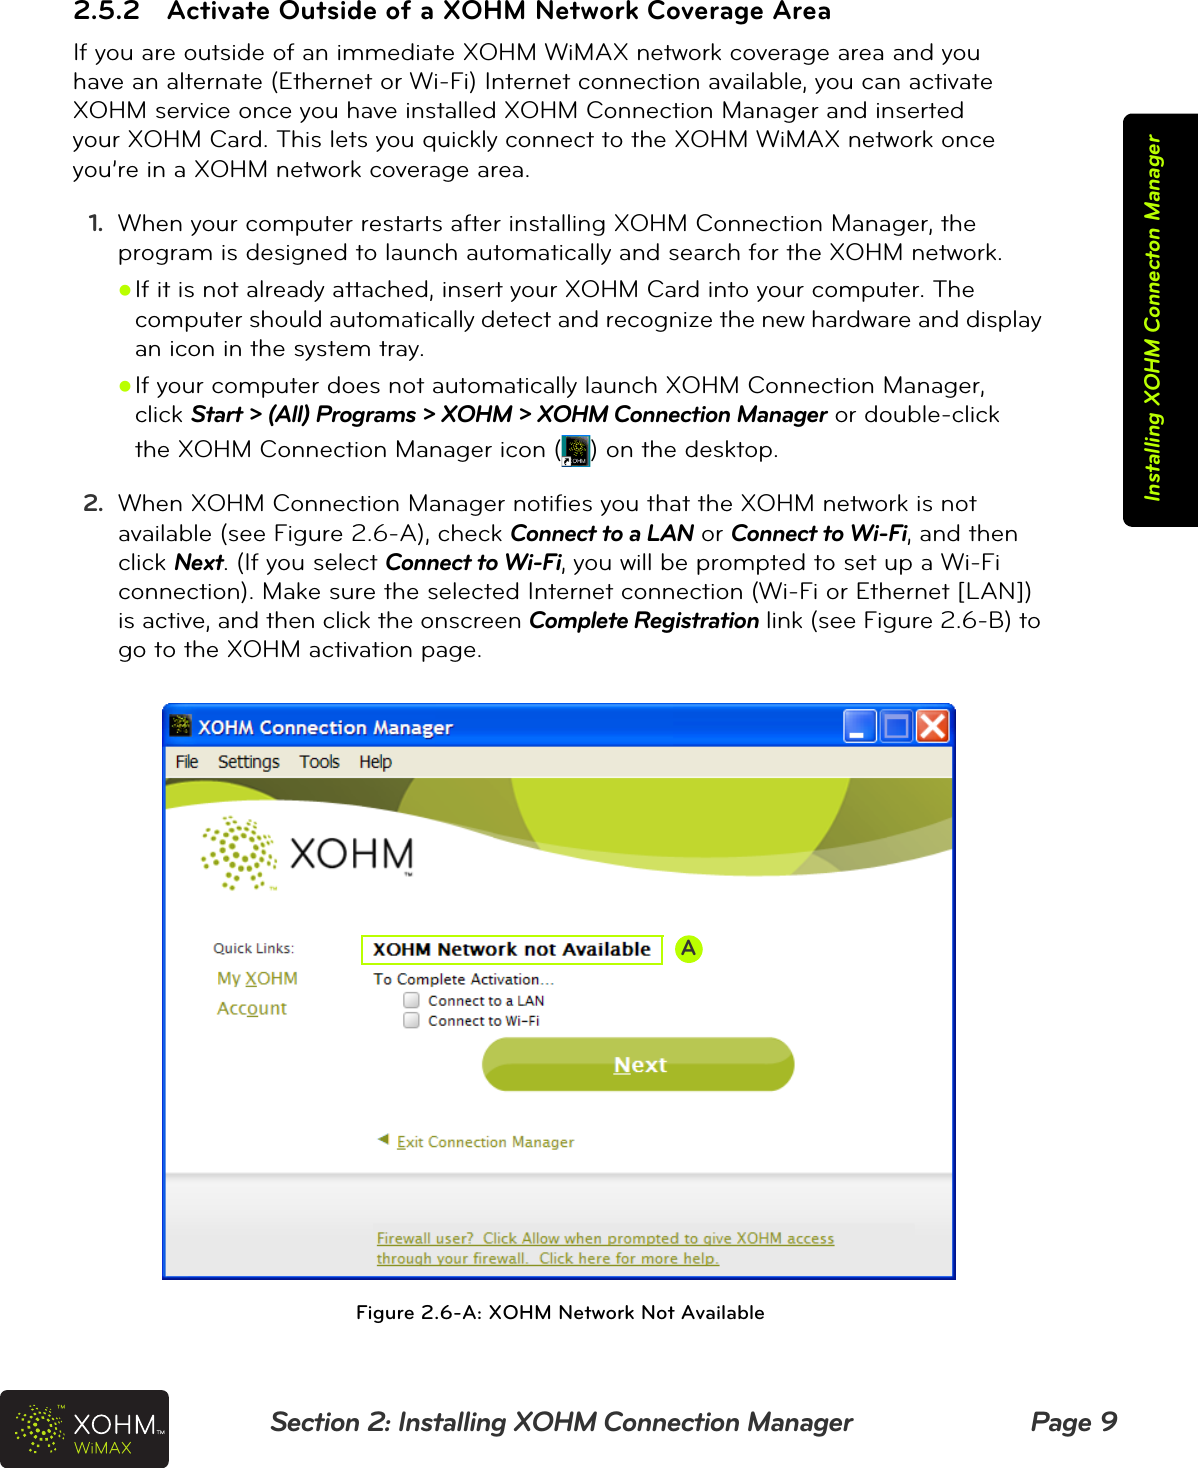 Section 2: Installing XOHM Connection Manager Page 9Installing XOHM Connecton Manager2.5.2 Activate Outside of a XOHM Network Coverage AreaIf you are outside of an immediate XOHM WiMAX network coverage area and you  have an alternate (Ethernet or Wi-Fi) Internet connection available, you can activate  XOHM service once you have installed XOHM Connection Manager and inserted  your XOHM Card. This lets you quickly connect to the XOHM WiMAX network once  you’re in a XOHM network coverage area.1. When your computer restarts after installing XOHM Connection Manager, the program is designed to launch automatically and search for the XOHM network.zIf it is not already attached, insert your XOHM Card into your computer. The computer should automatically detect and recognize the new hardware and display an icon in the system tray.zIf your computer does not automatically launch XOHM Connection Manager,  click Start &gt; (All) Programs &gt; XOHM &gt; XOHM Connection Manager or double-click  the XOHM Connection Manager icon ( ) on the desktop.2. When XOHM Connection Manager notifies you that the XOHM network is not available (see Figure 2.6-A), check Connect to a LAN or Connect to Wi-Fi, and then click Next. (If you select Connect to Wi-Fi, you will be prompted to set up a Wi-Fi connection). Make sure the selected Internet connection (Wi-Fi or Ethernet [LAN]) is active, and then click the onscreen Complete Registration link (see Figure 2.6-B) to go to the XOHM activation page.  Figure 2.6-A: XOHM Network Not AvailableA